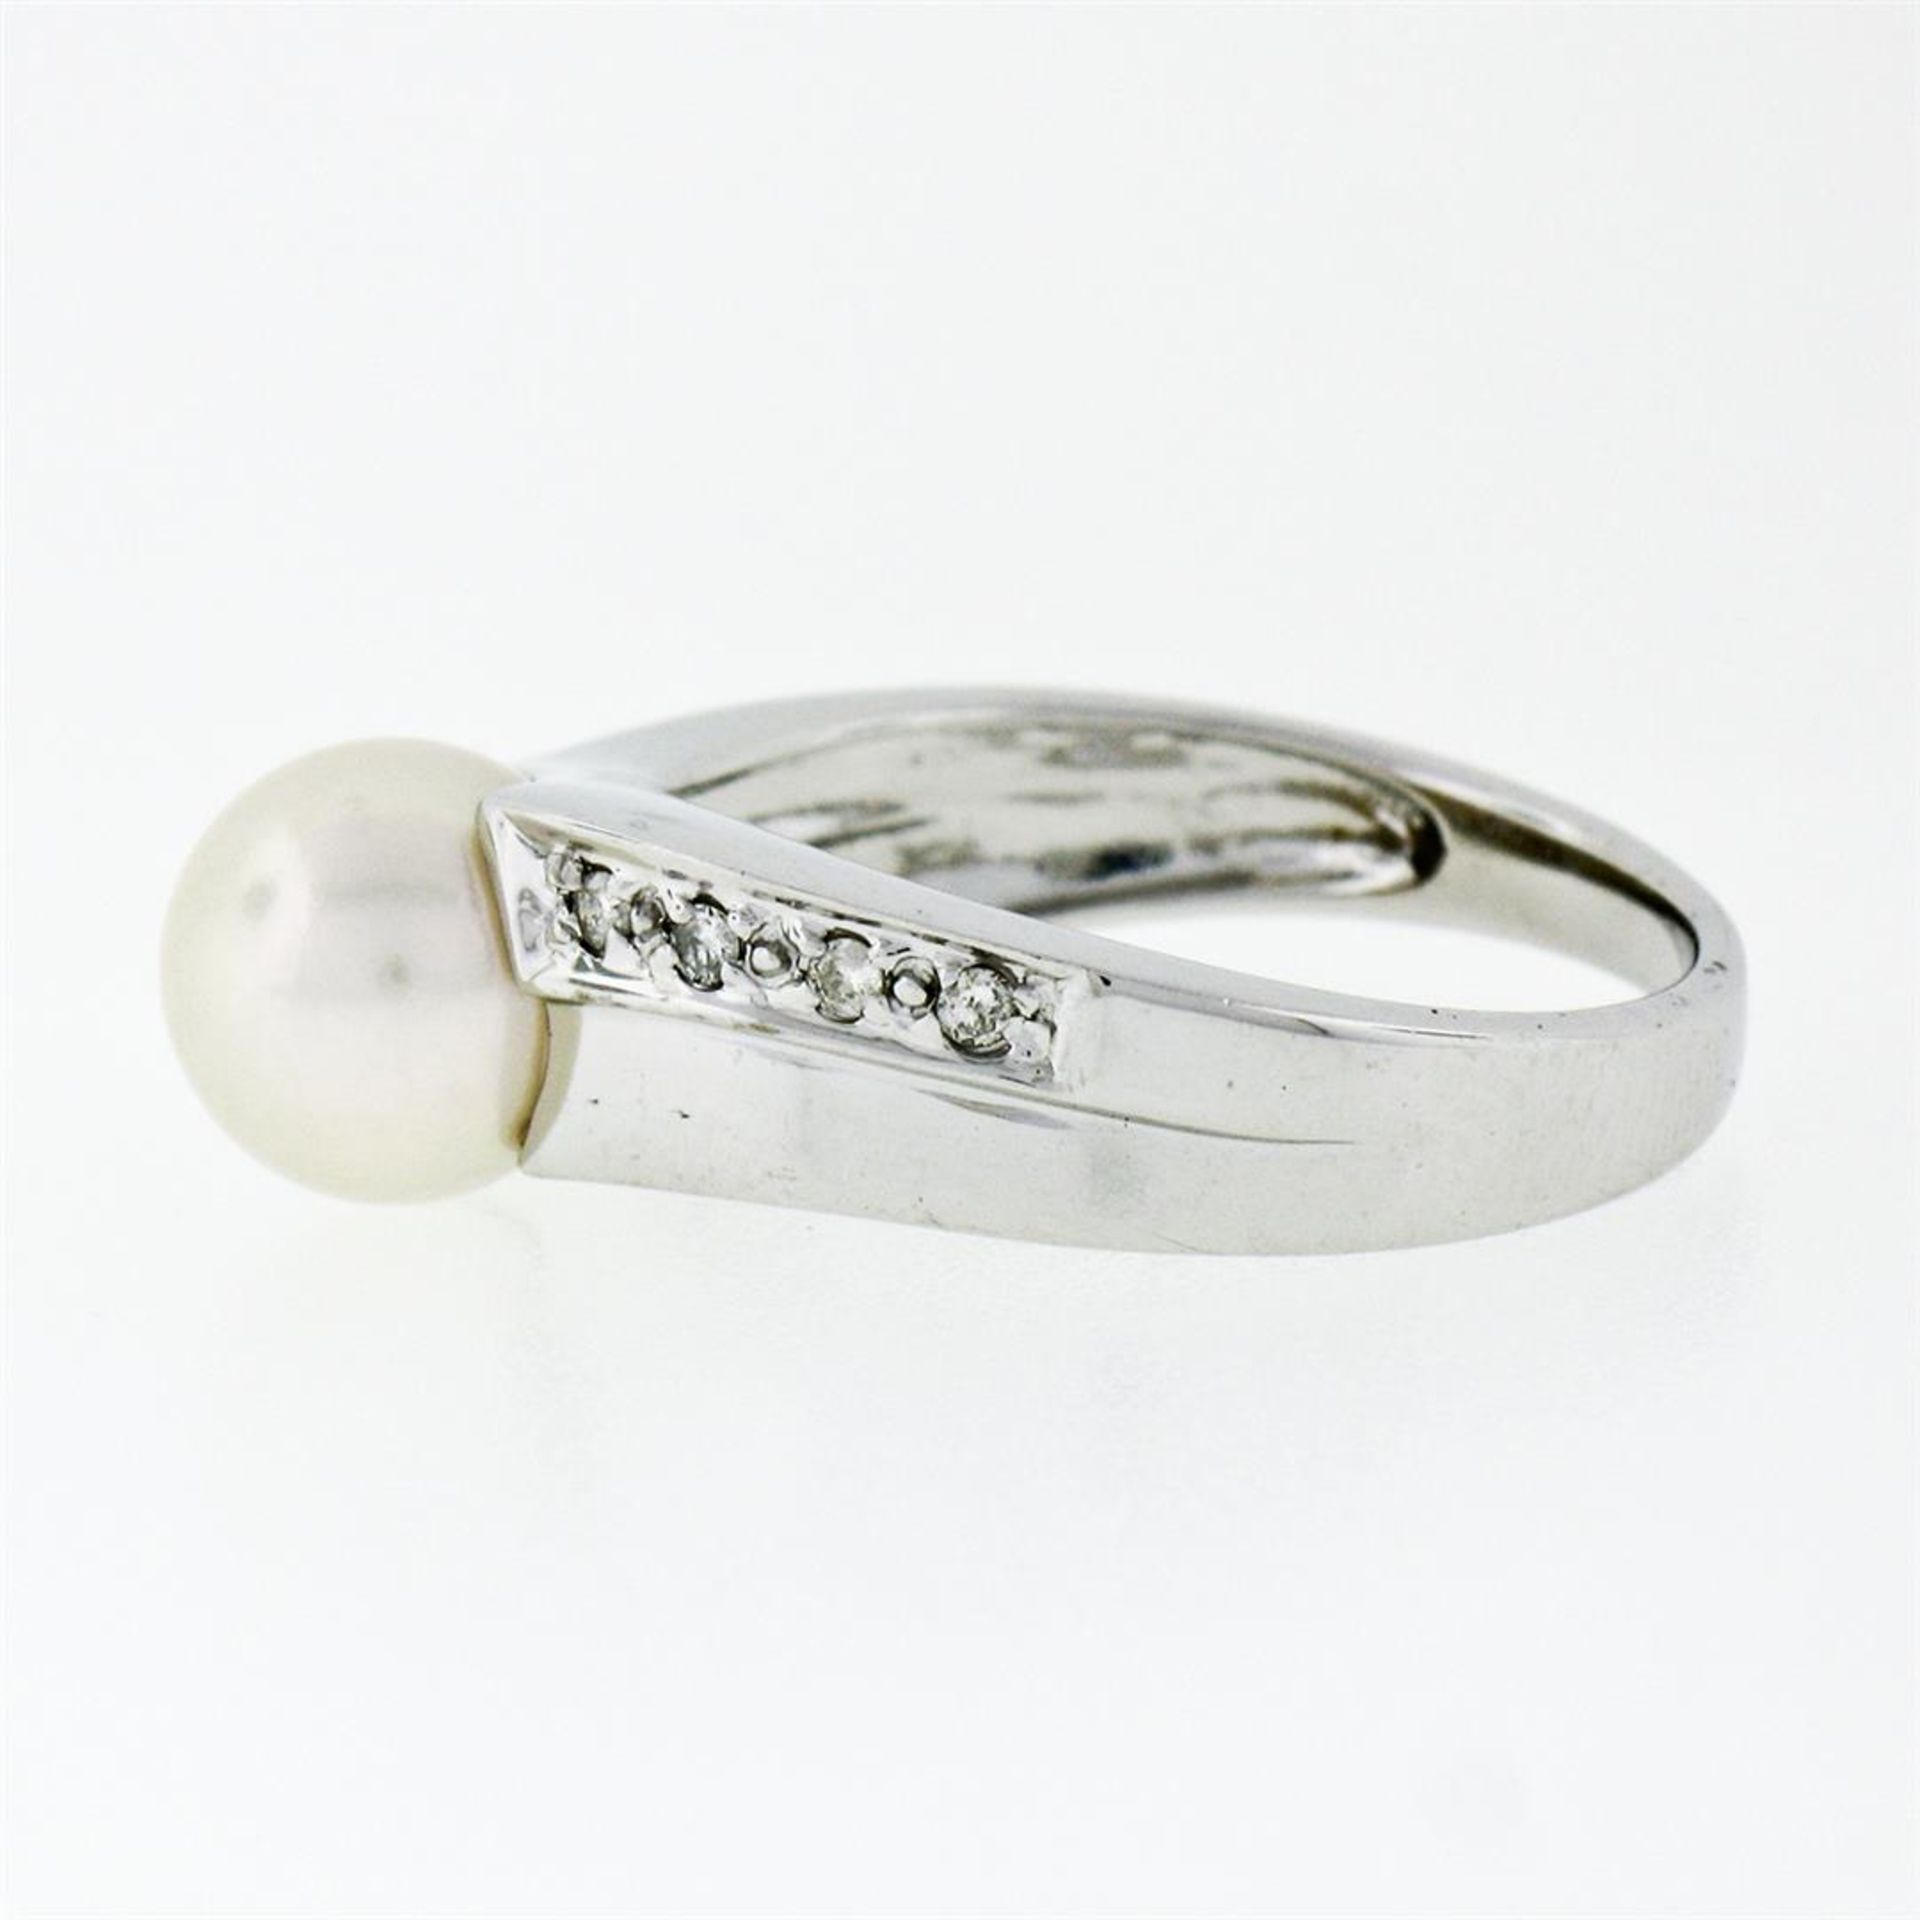 Estate 14k White Gold 7.65mm Akoya Pearl Solitaire & Pave Set Diamond Band Ring - Image 5 of 8